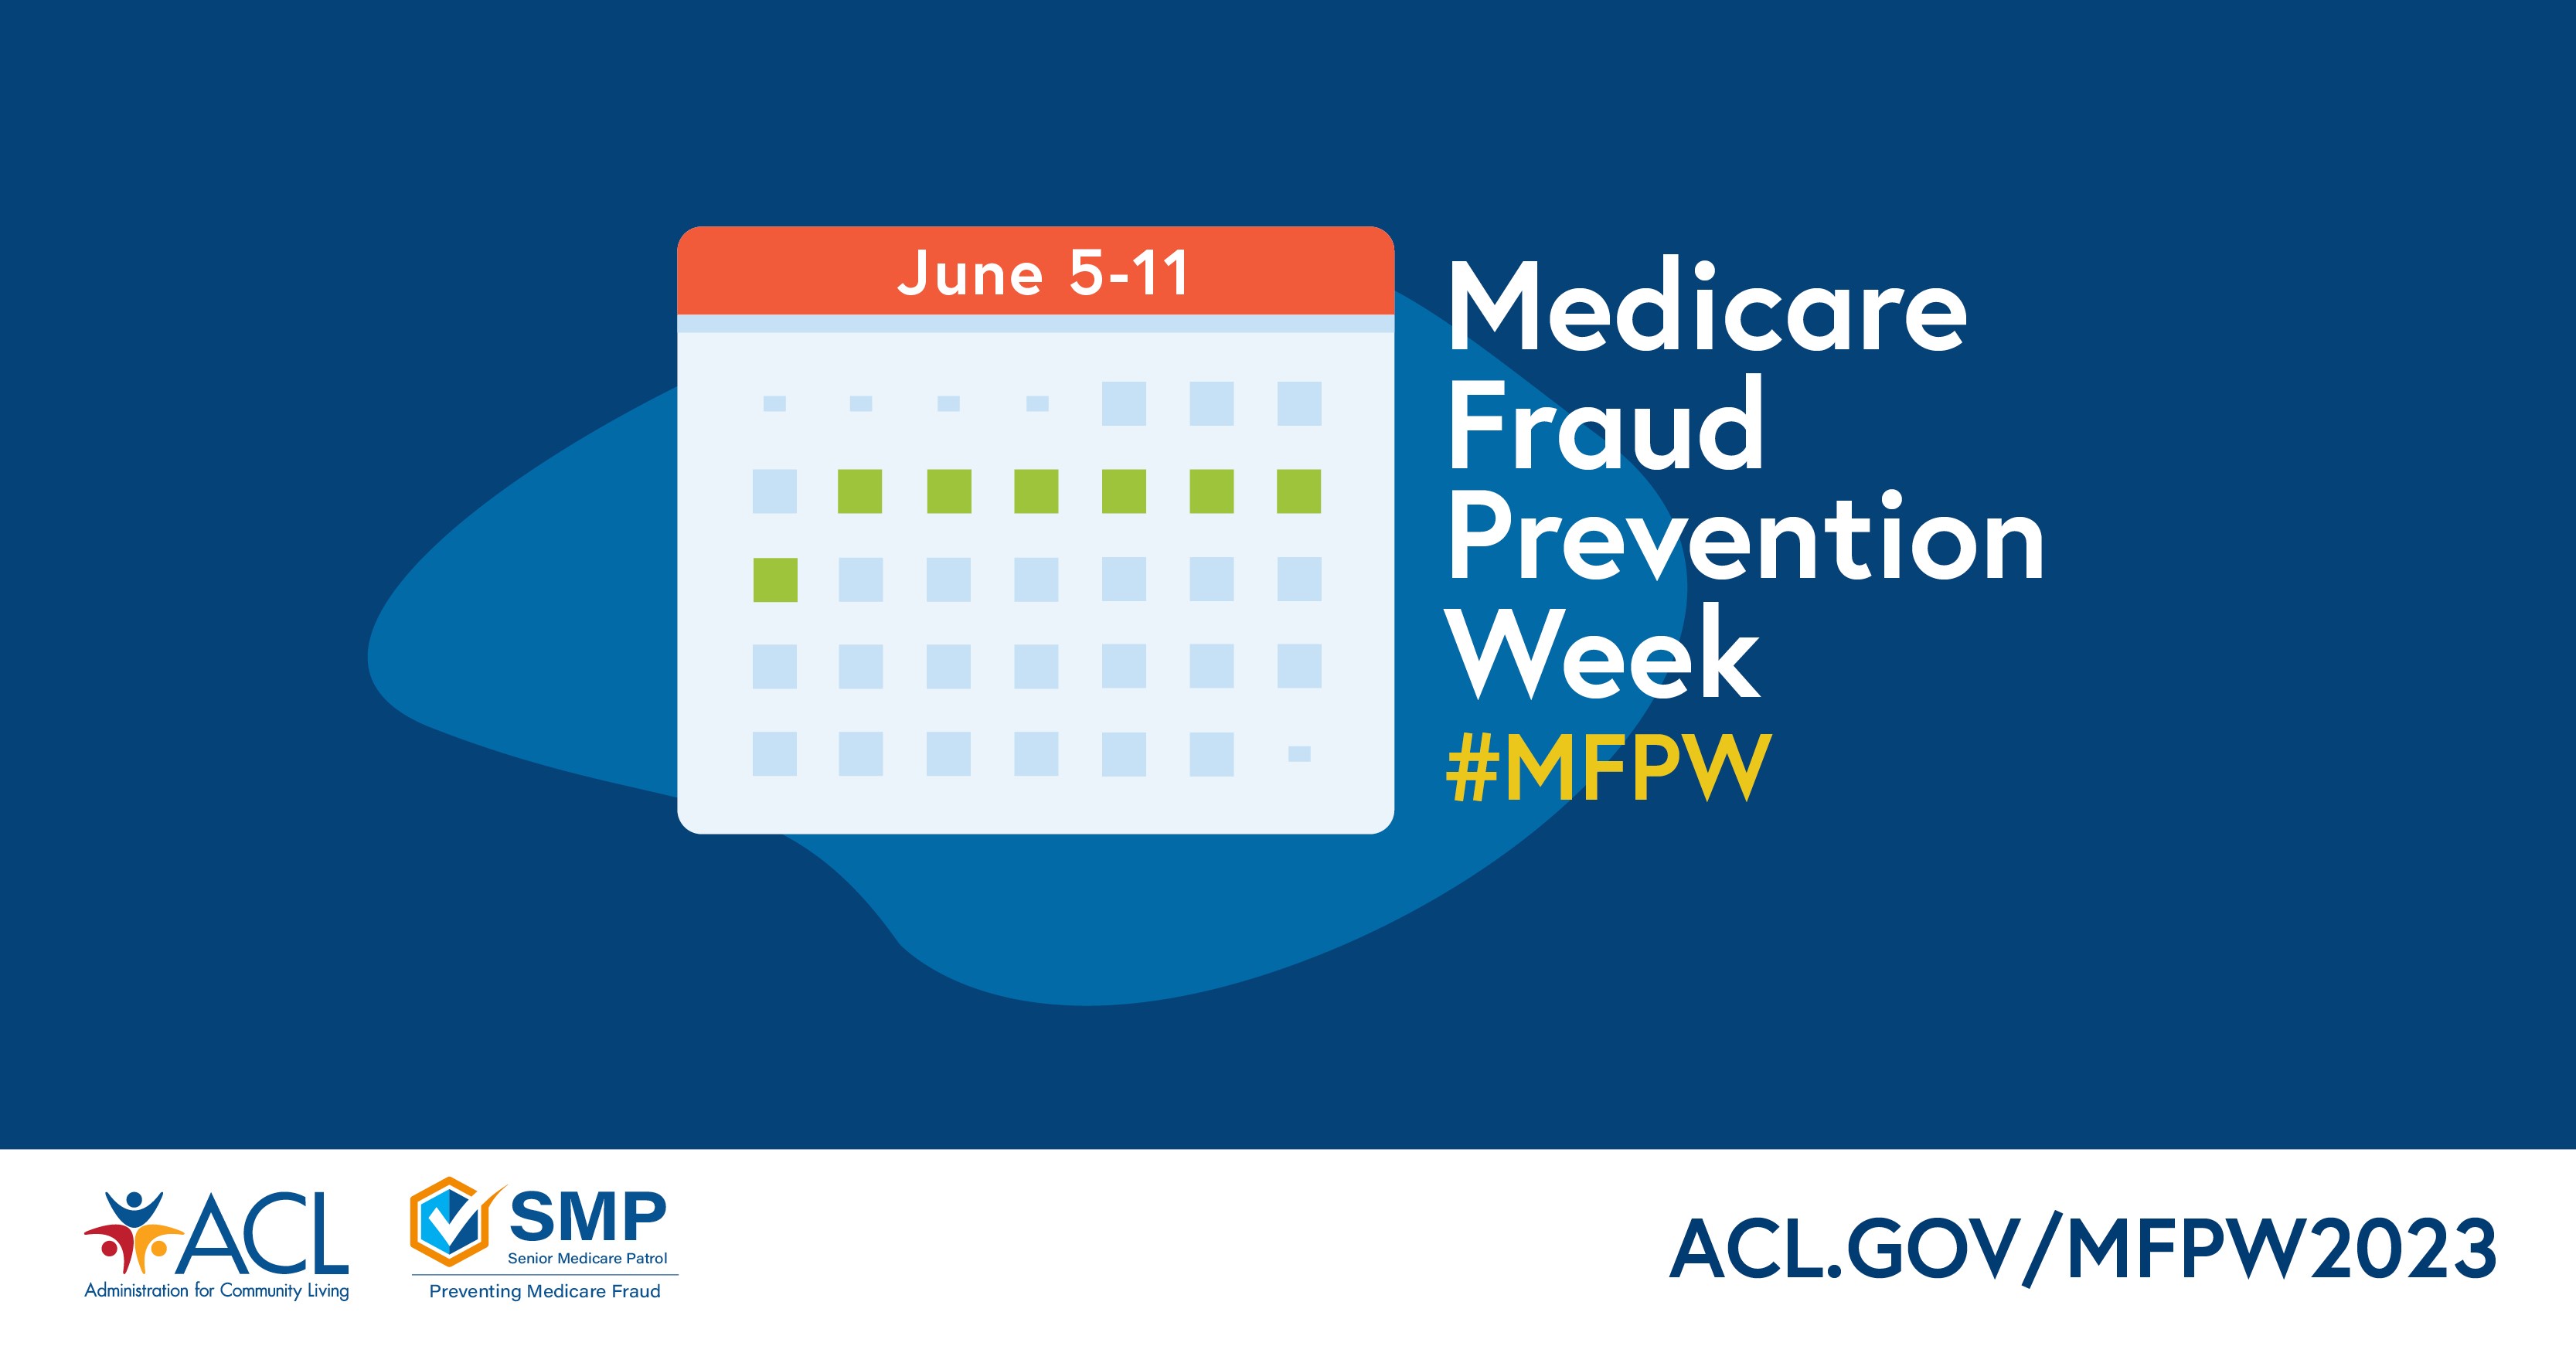 June 5-11 Medicare Fraud Prevention Week. #MFPW. ACL, Administration for Community Living. SMP, Senior Medicare Patrol: Preventing Medicare Fraud. ACL.gov/MFPW2023